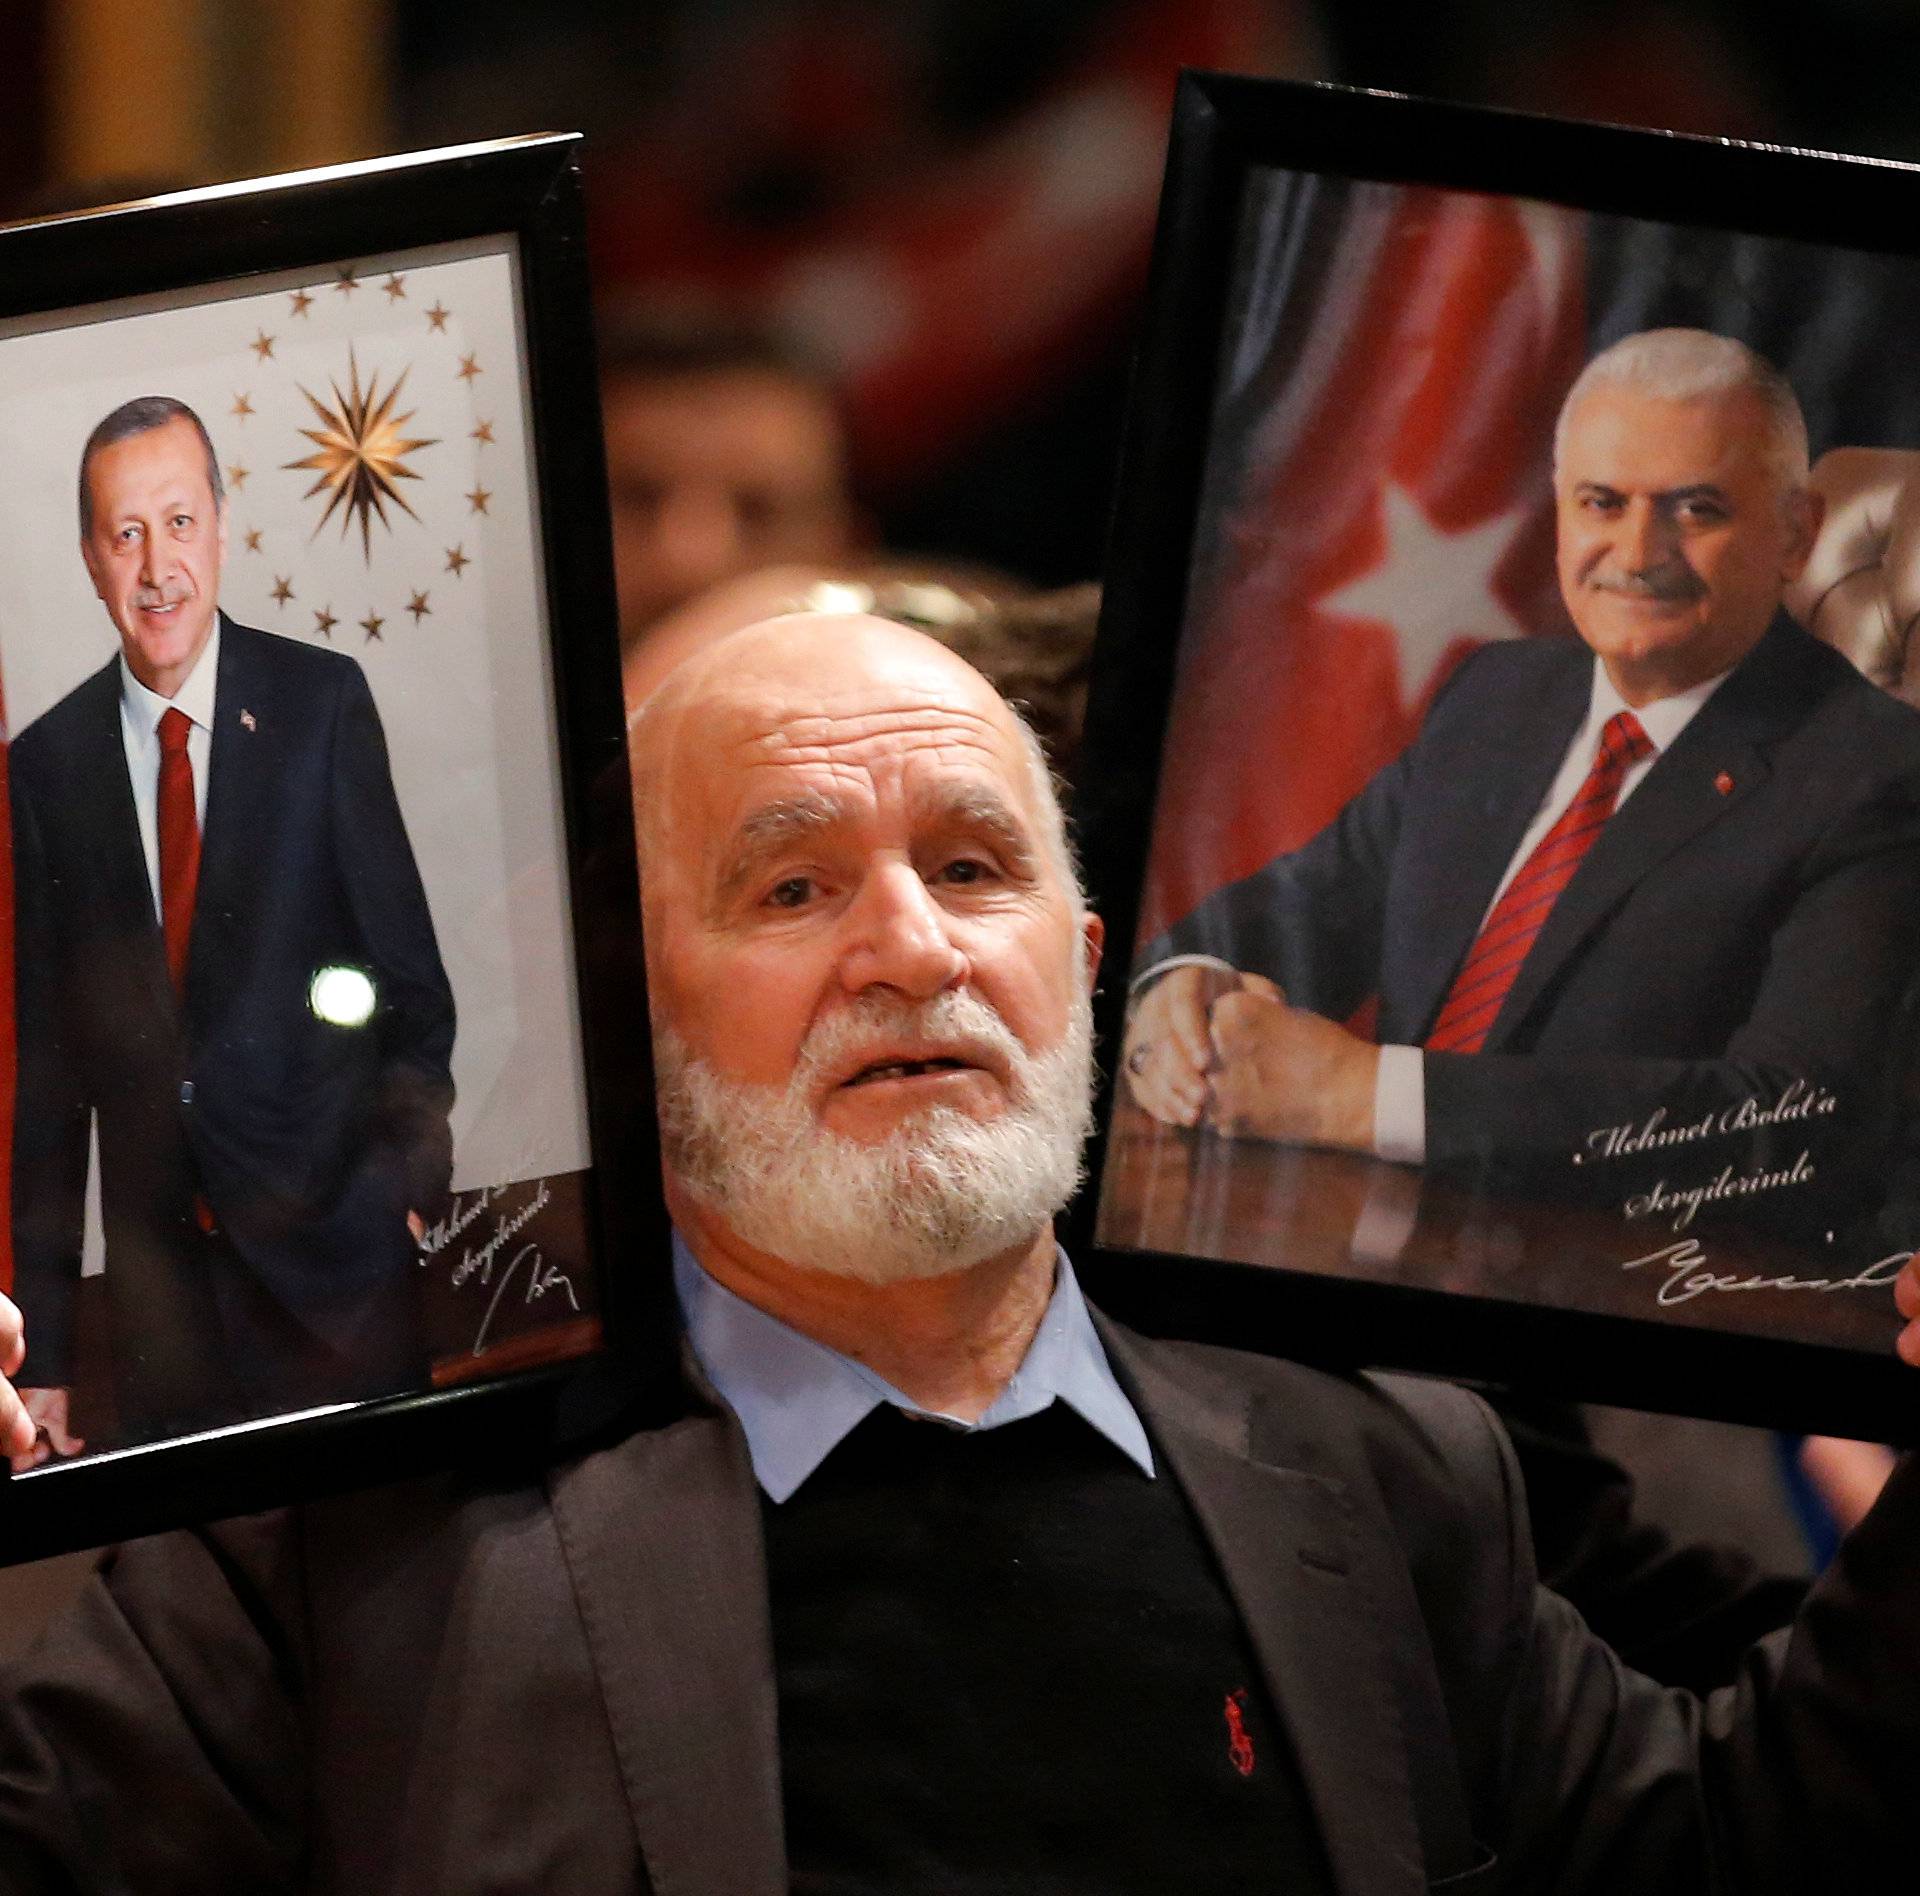 A supporter holds portraits of Turkish President Erdogan and Turkish Prime Minister Yildirim, ahead of the start of a political rally on Turkey's upcoming referendum, in Metz